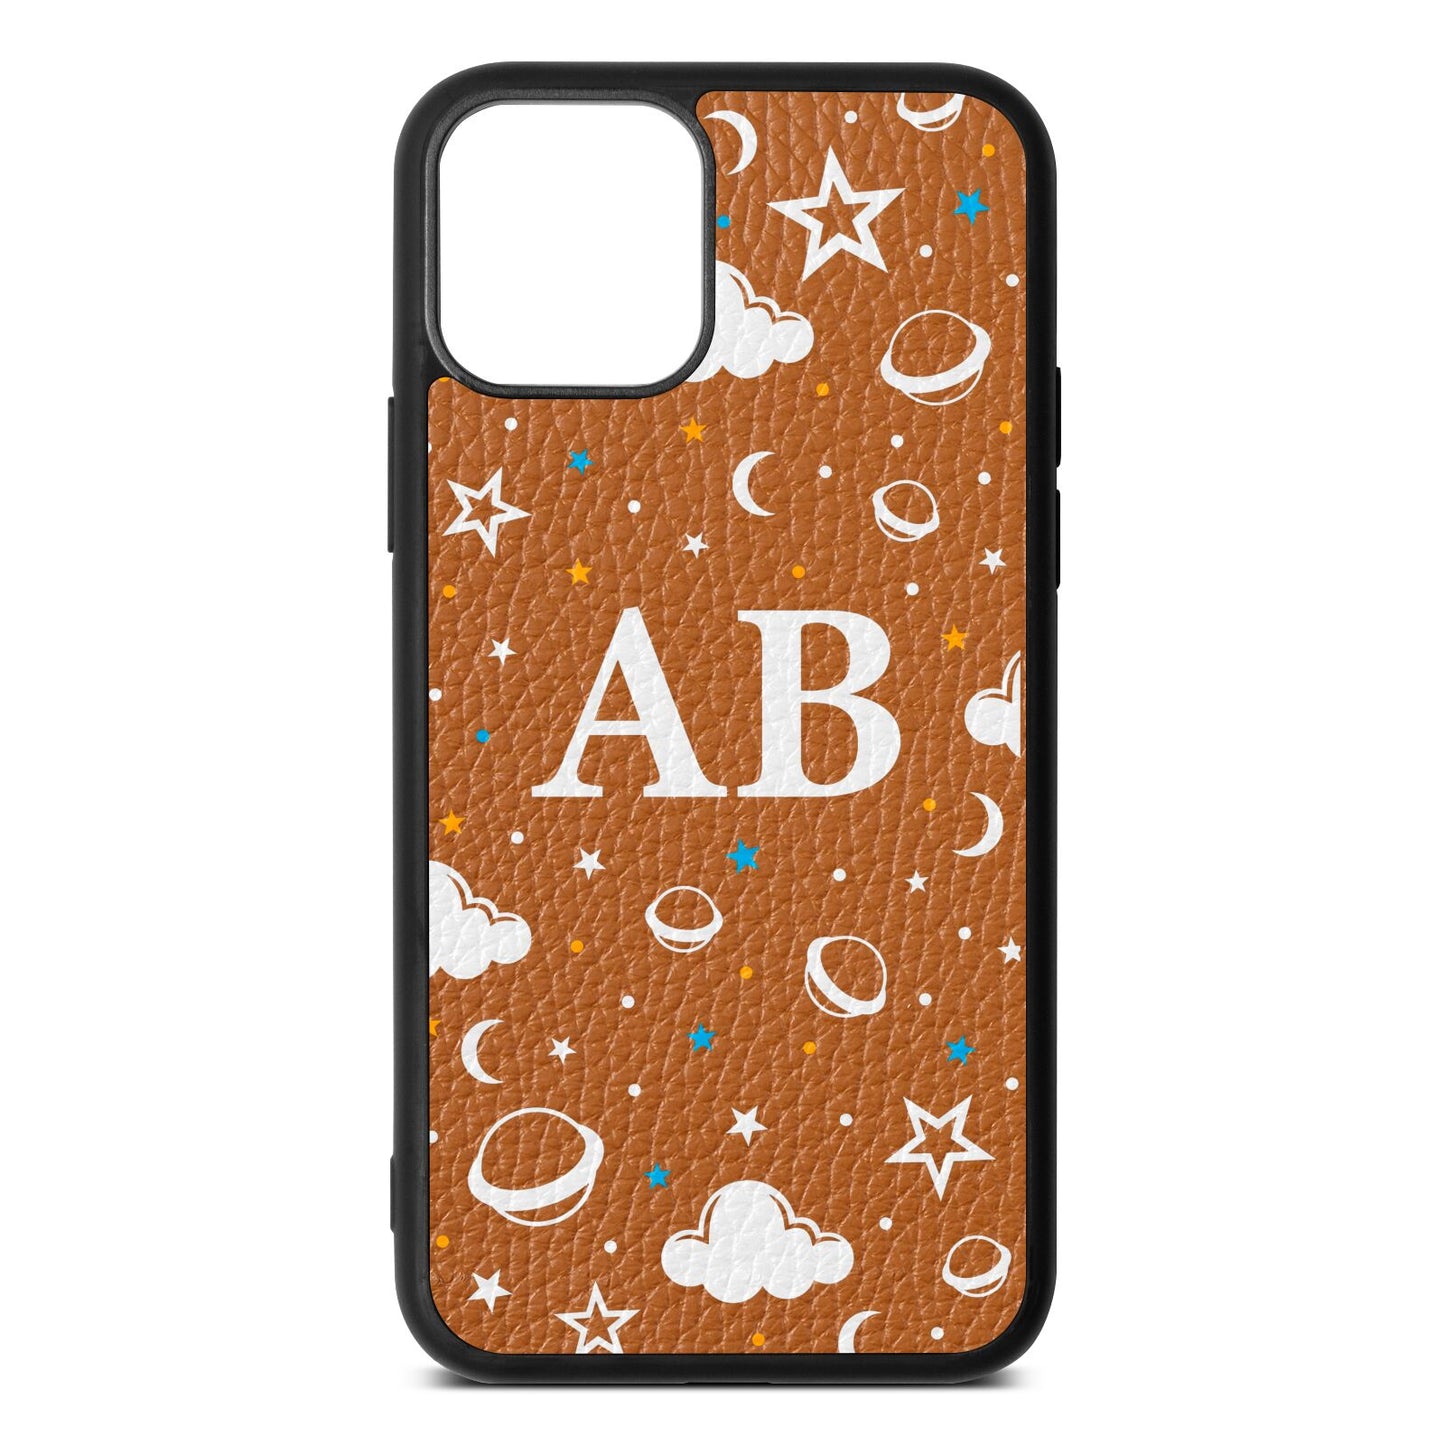 Astronomical Initials Tan Pebble Leather iPhone 11 Case